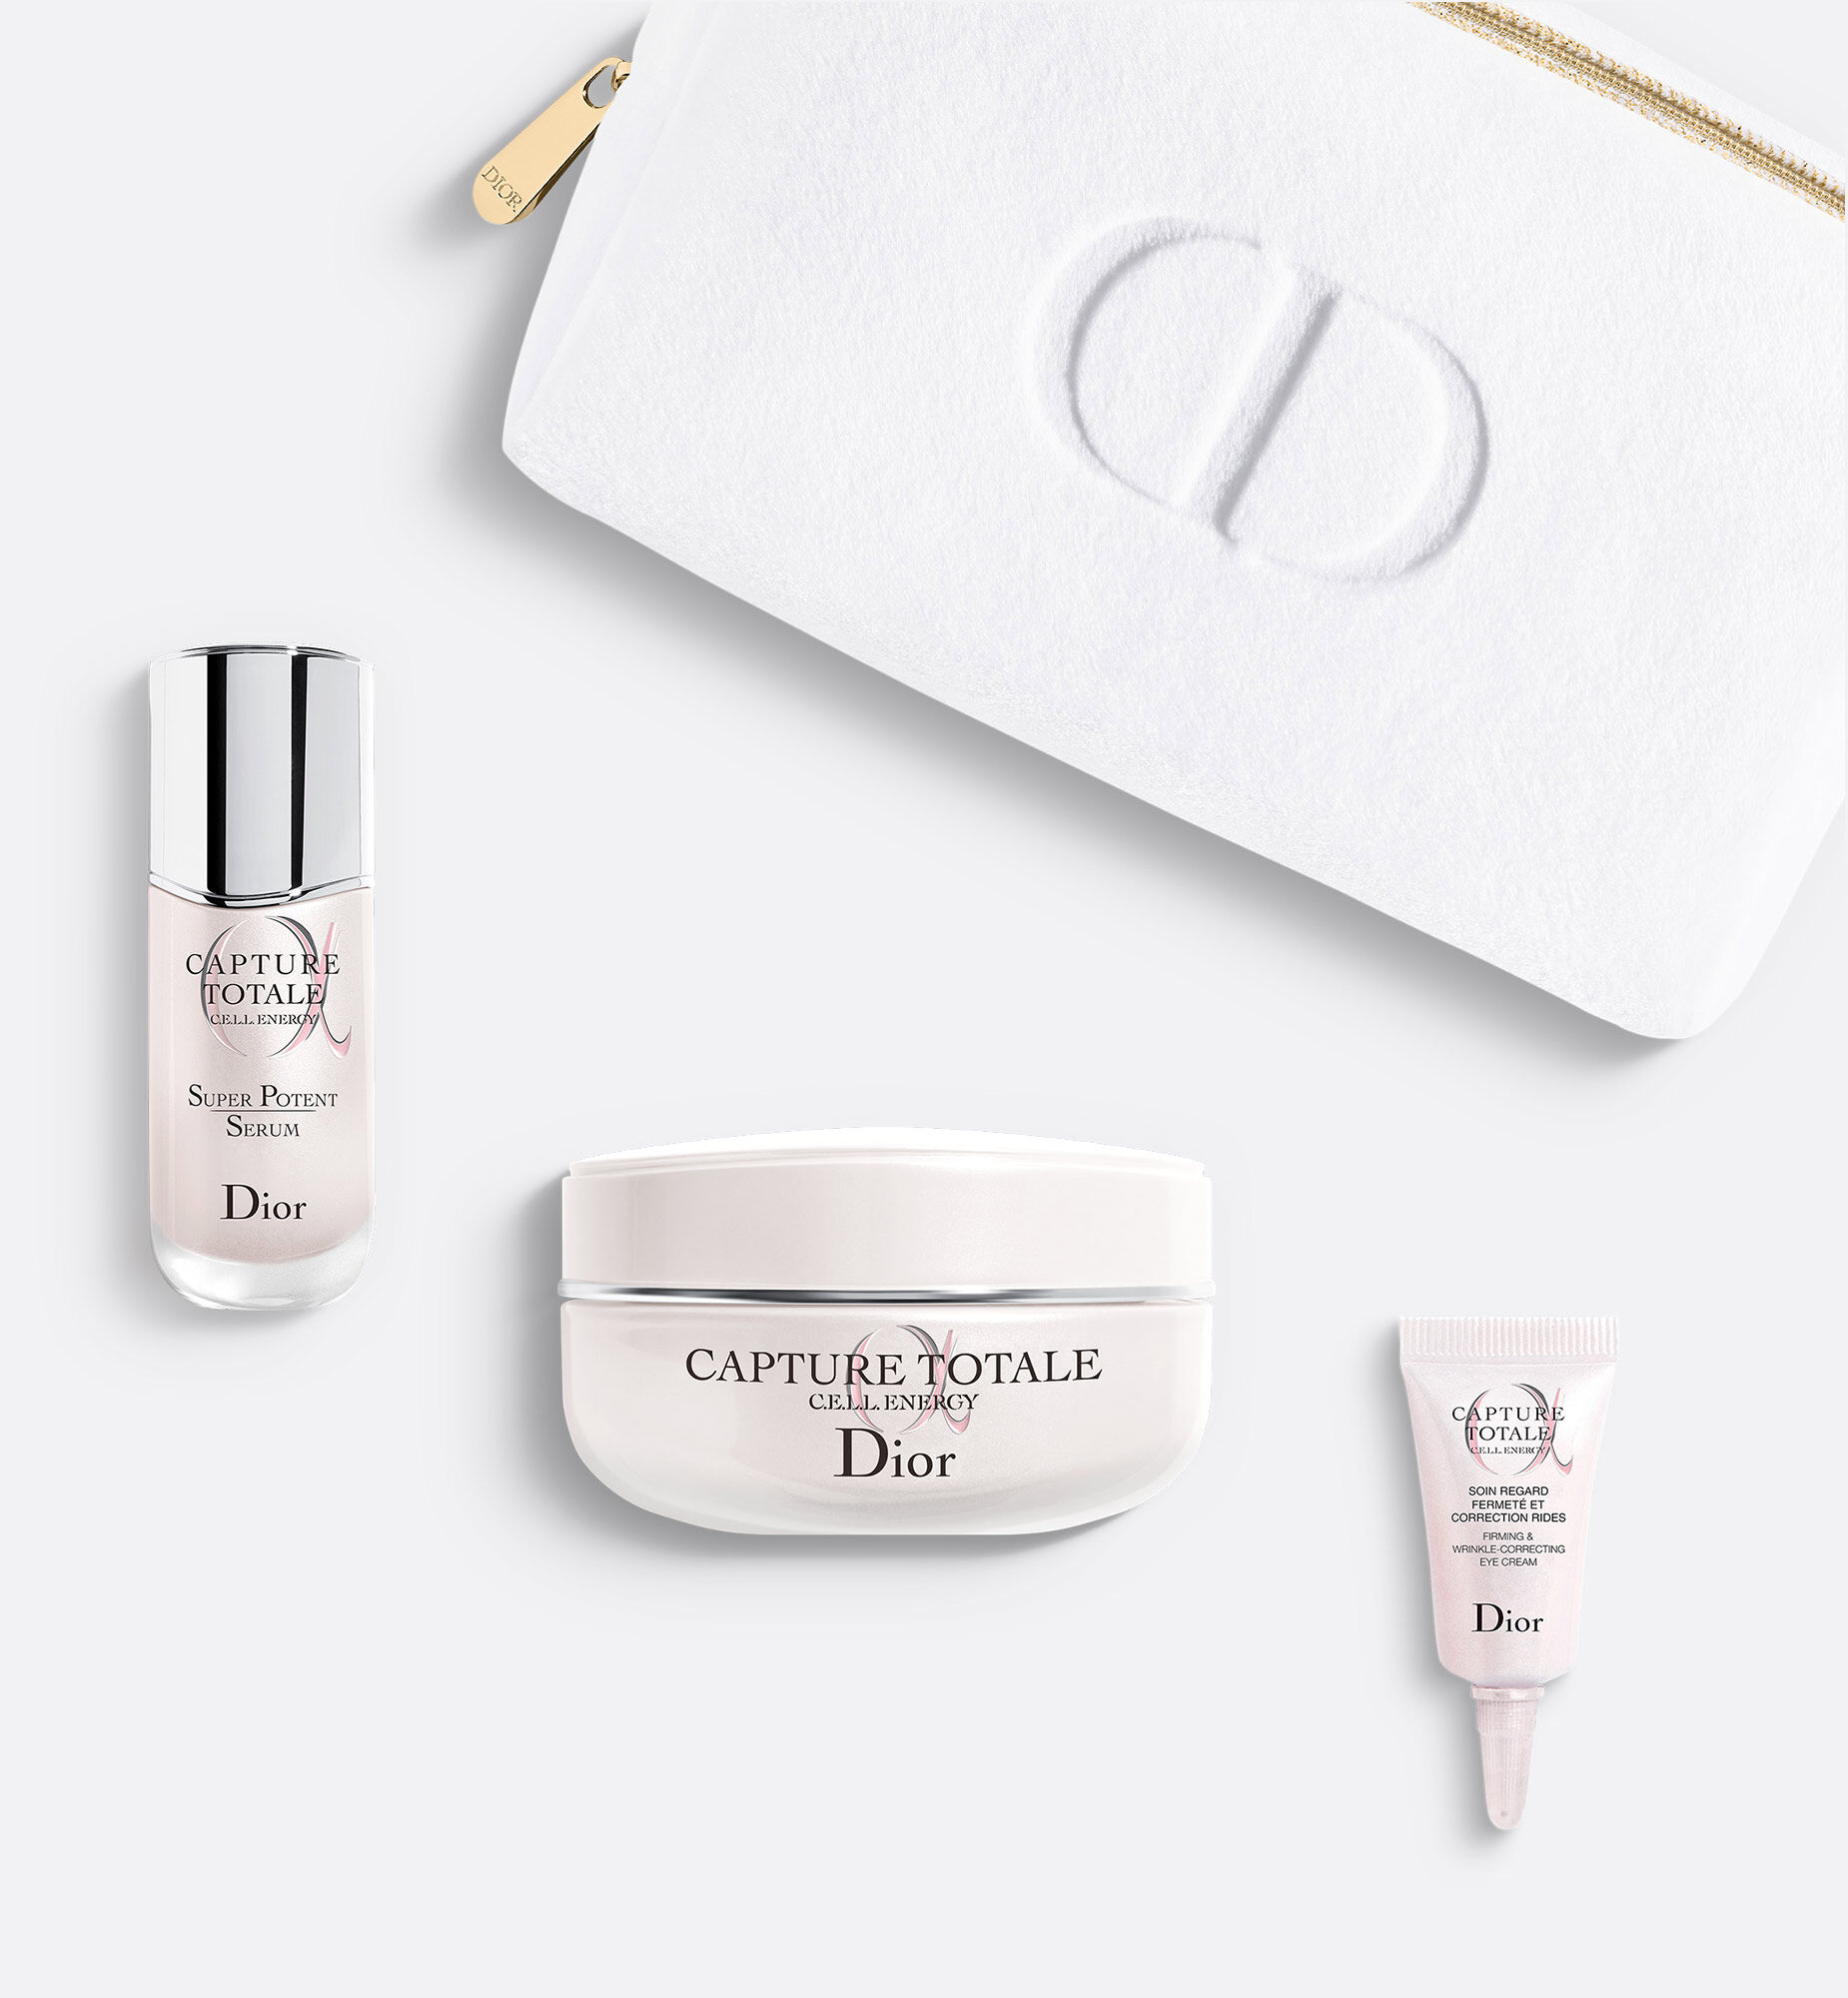 Dior Capture Totale Facial Skincare Set: 3 Products & Pouch | DIOR